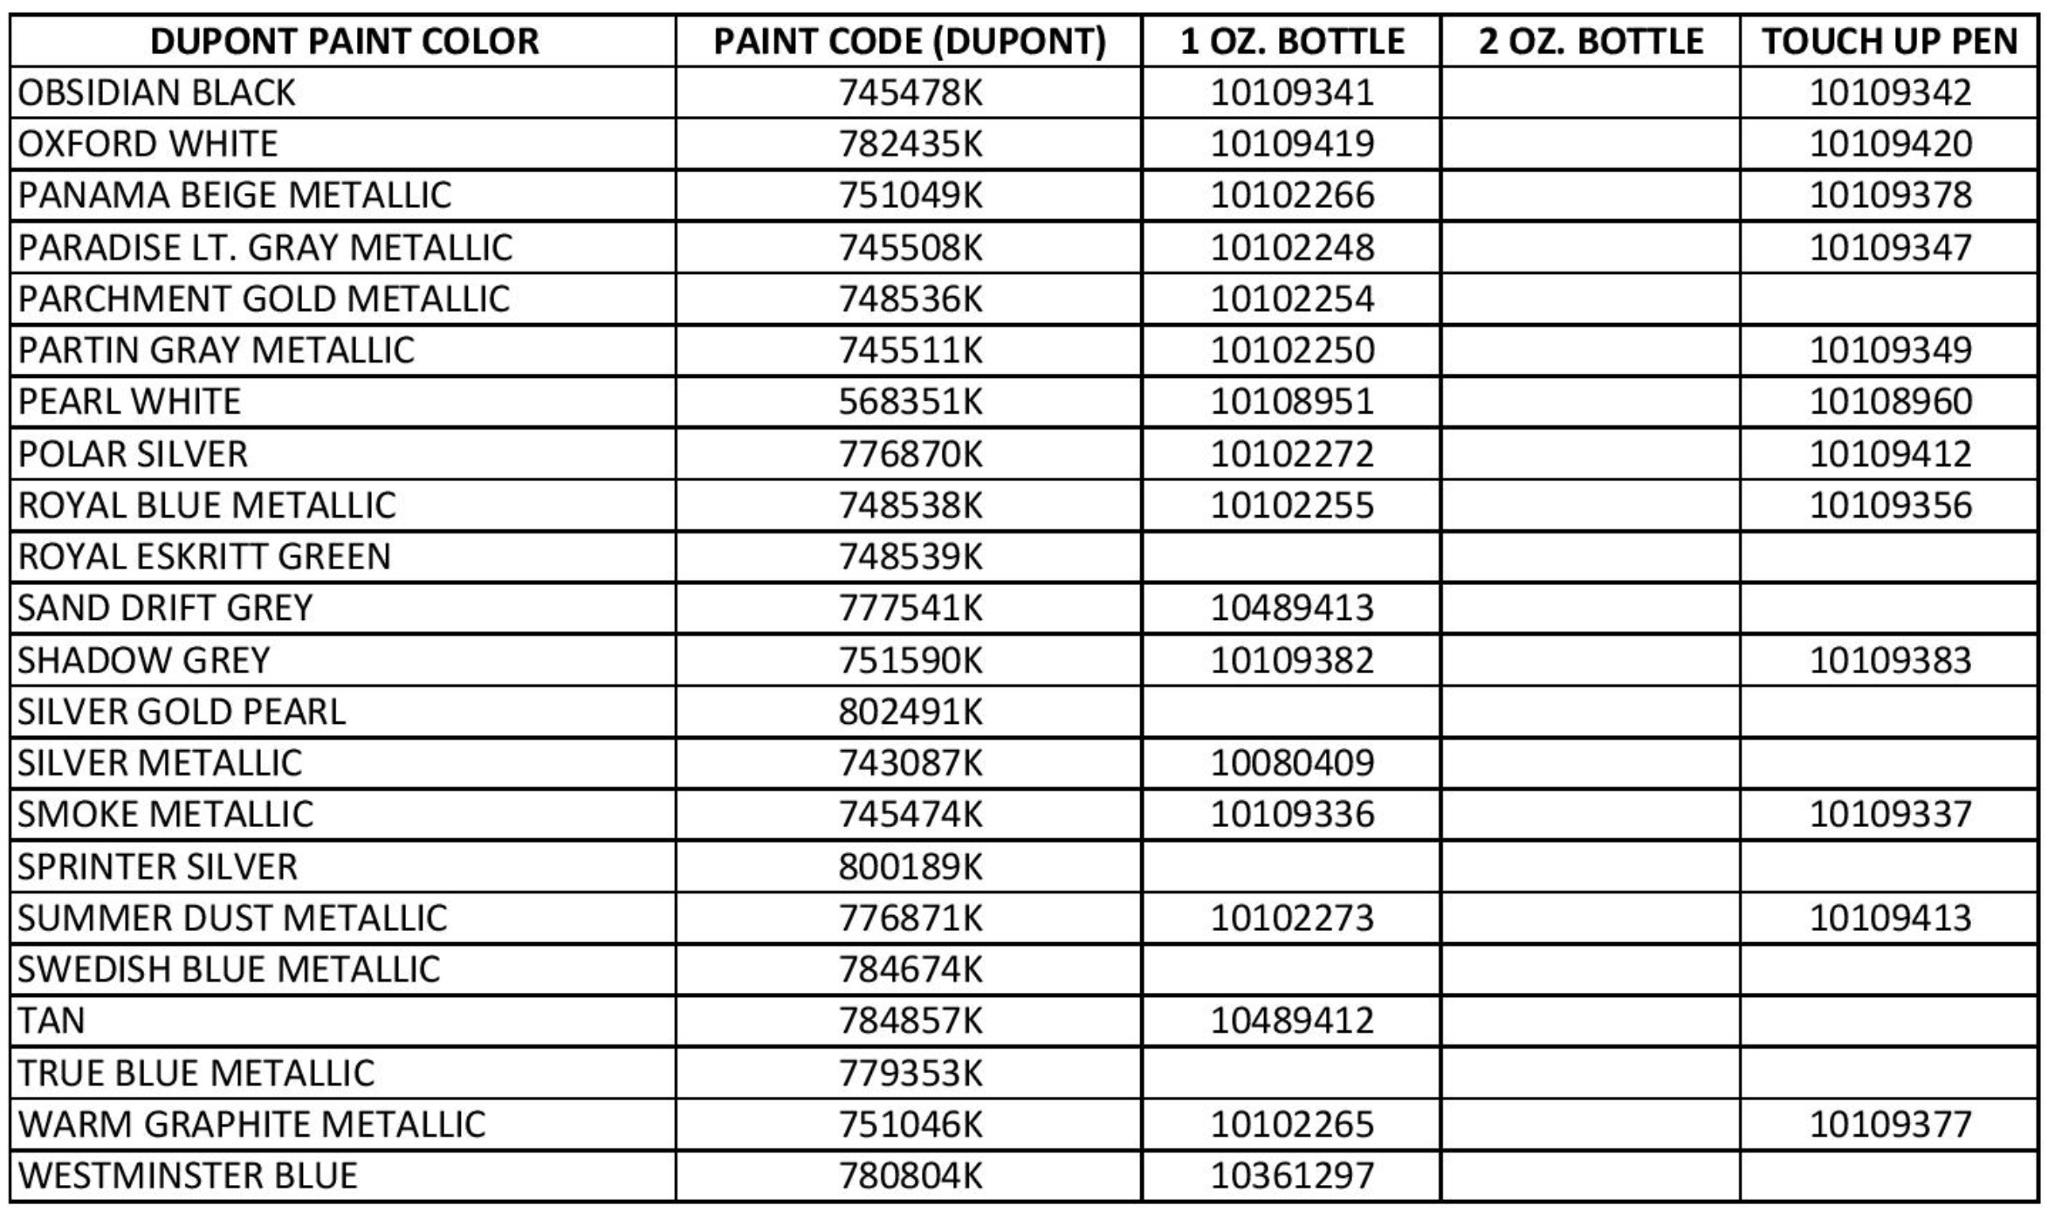 Touch up paint codes